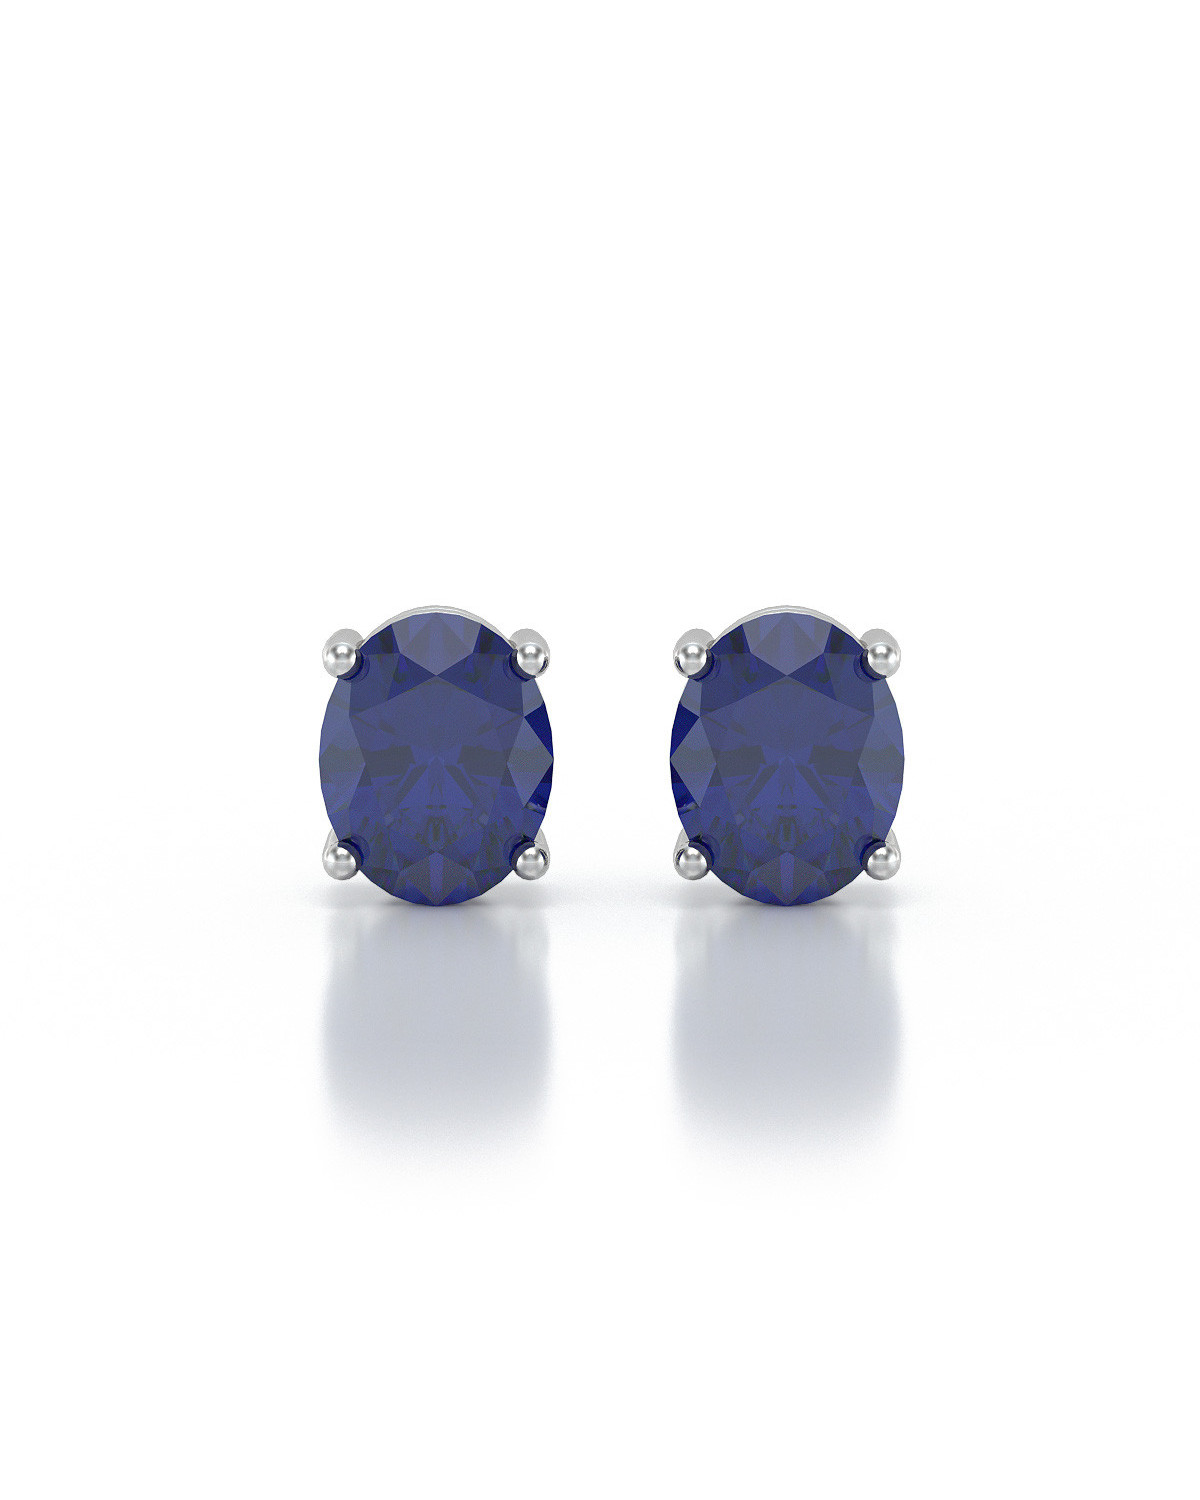 White Gold Earrings with Faceted Oval Sapphire